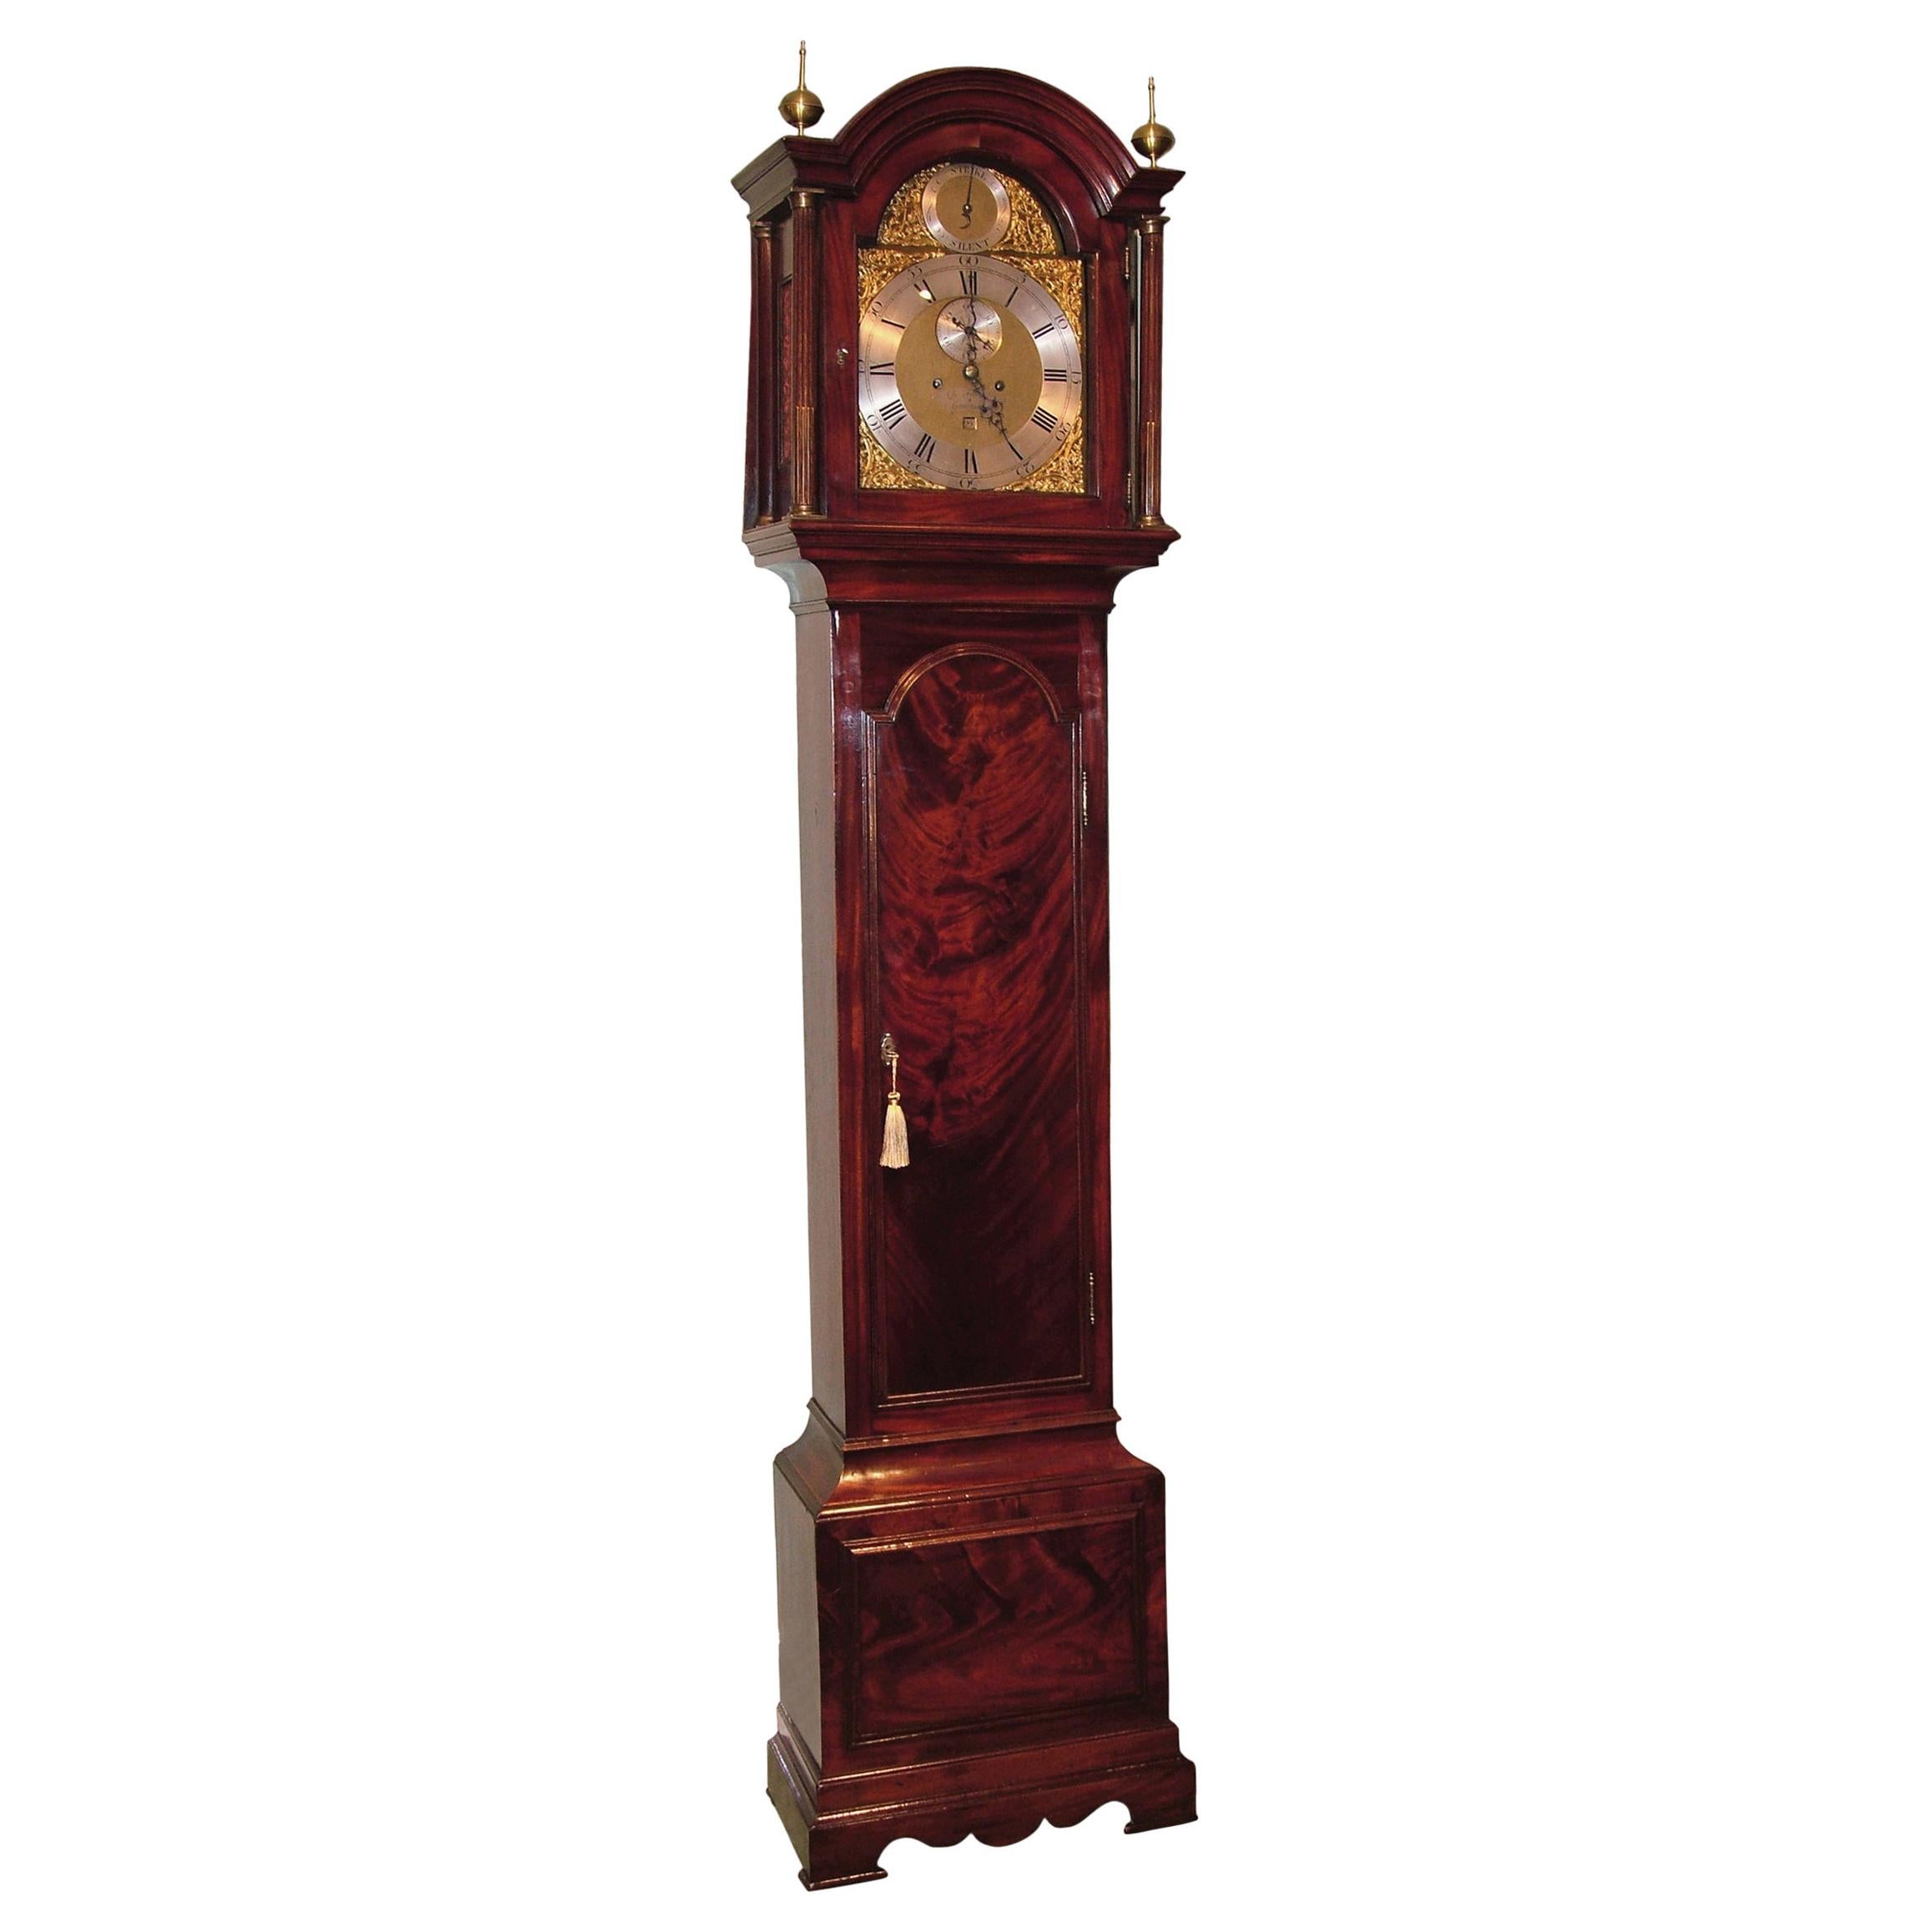 A late 18th century mahogany long case clock, by B. Francis of Gravesend, having arched top with brass finials and fluted columns, enclosing eight-day striking movement with silvered dial and gilt brass spandrels. The clock with flame figured door